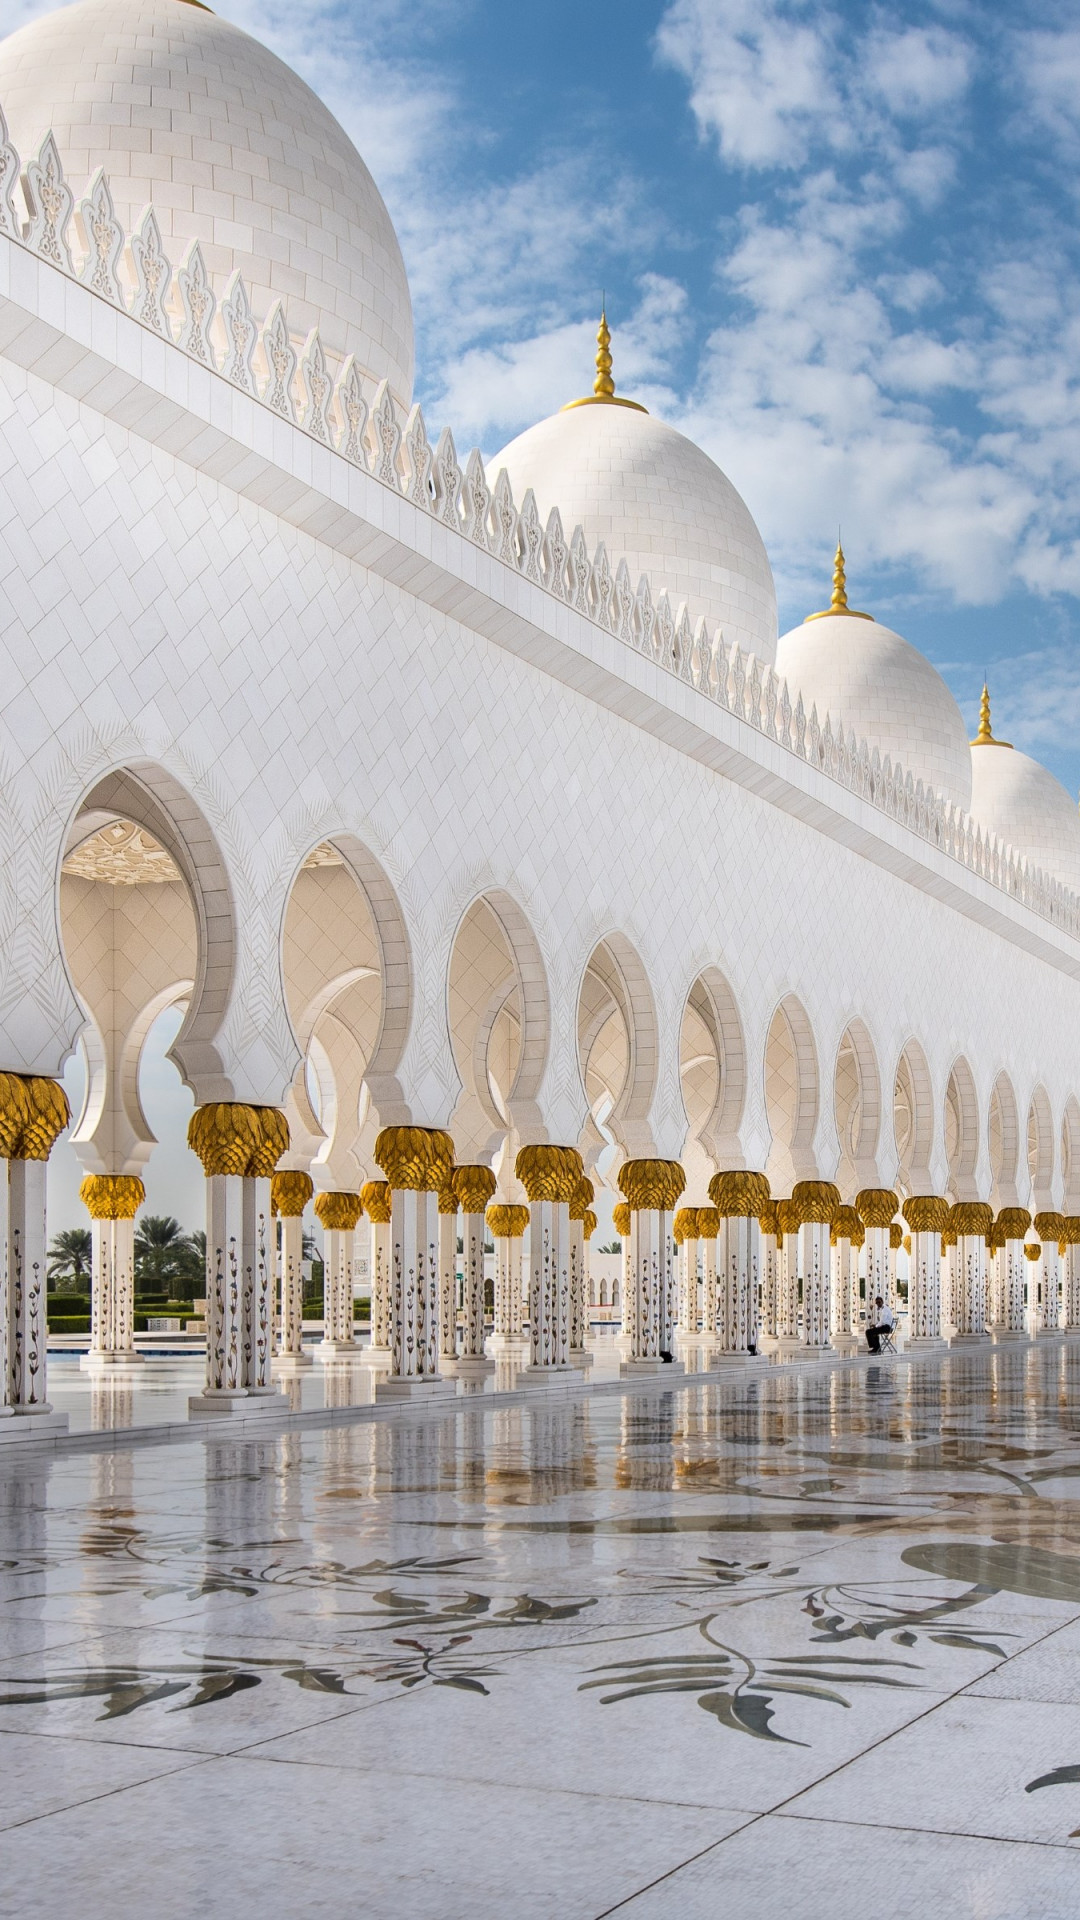 The Architecture Of Sheikh Zayed Mosque Wallpaper - 1080x1920 Wallpaper -  